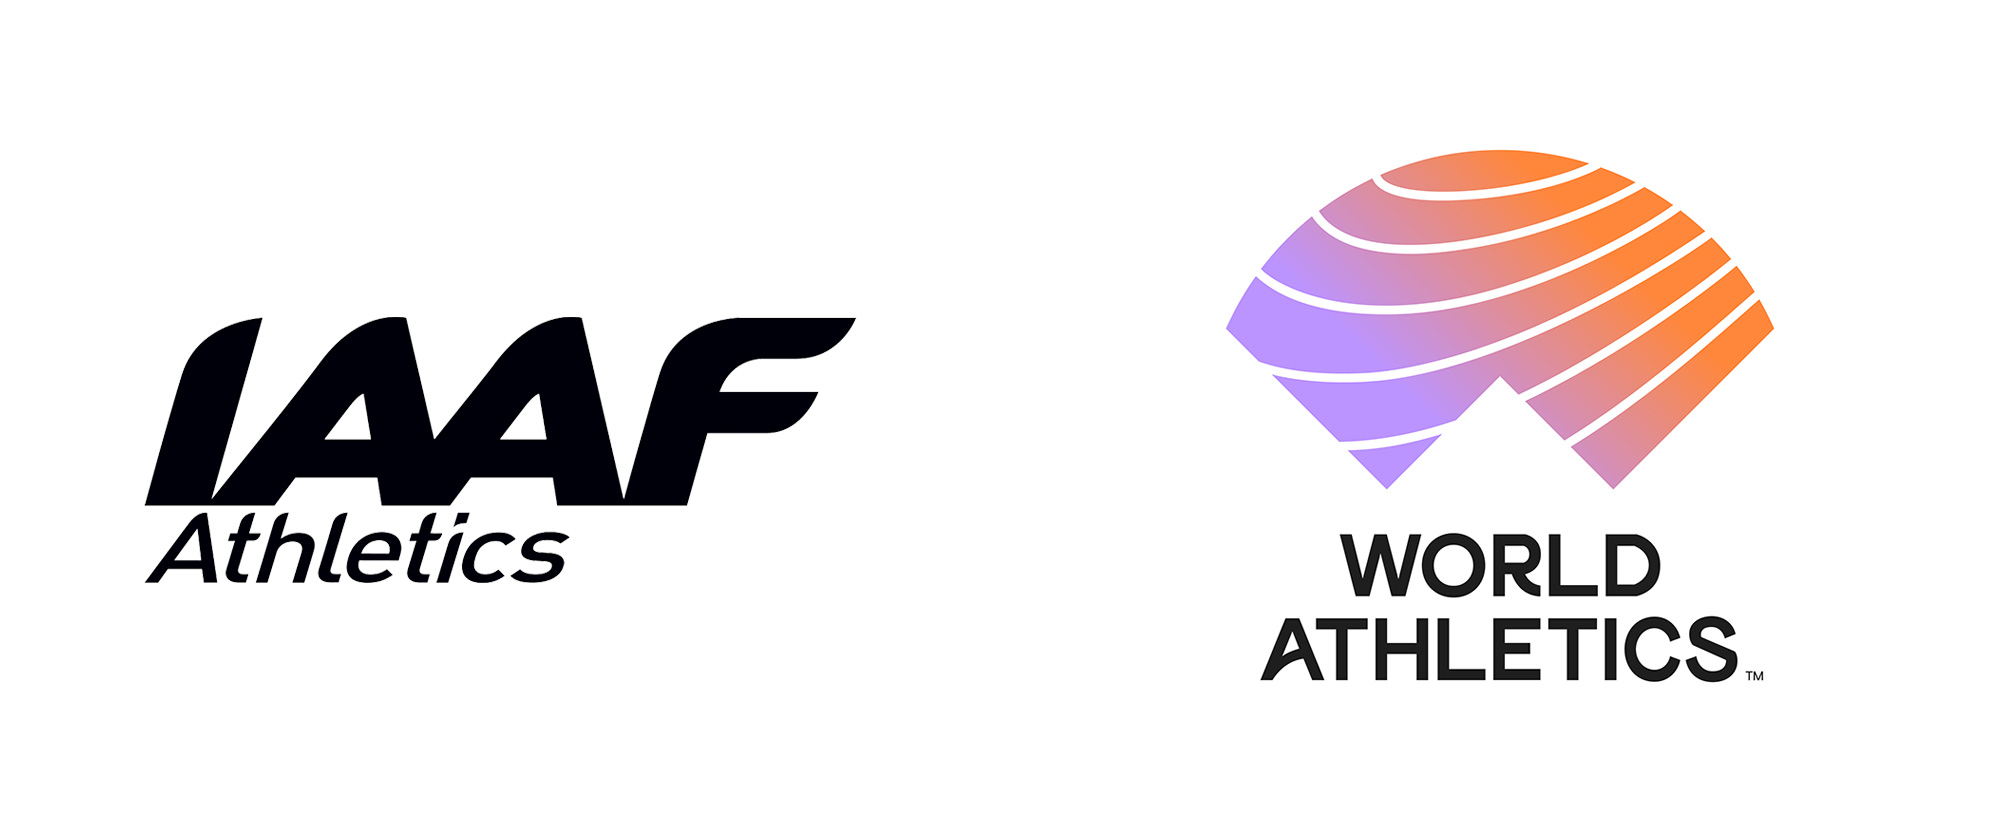 Brand New: New Name, Logo, and Identity for World Athletics